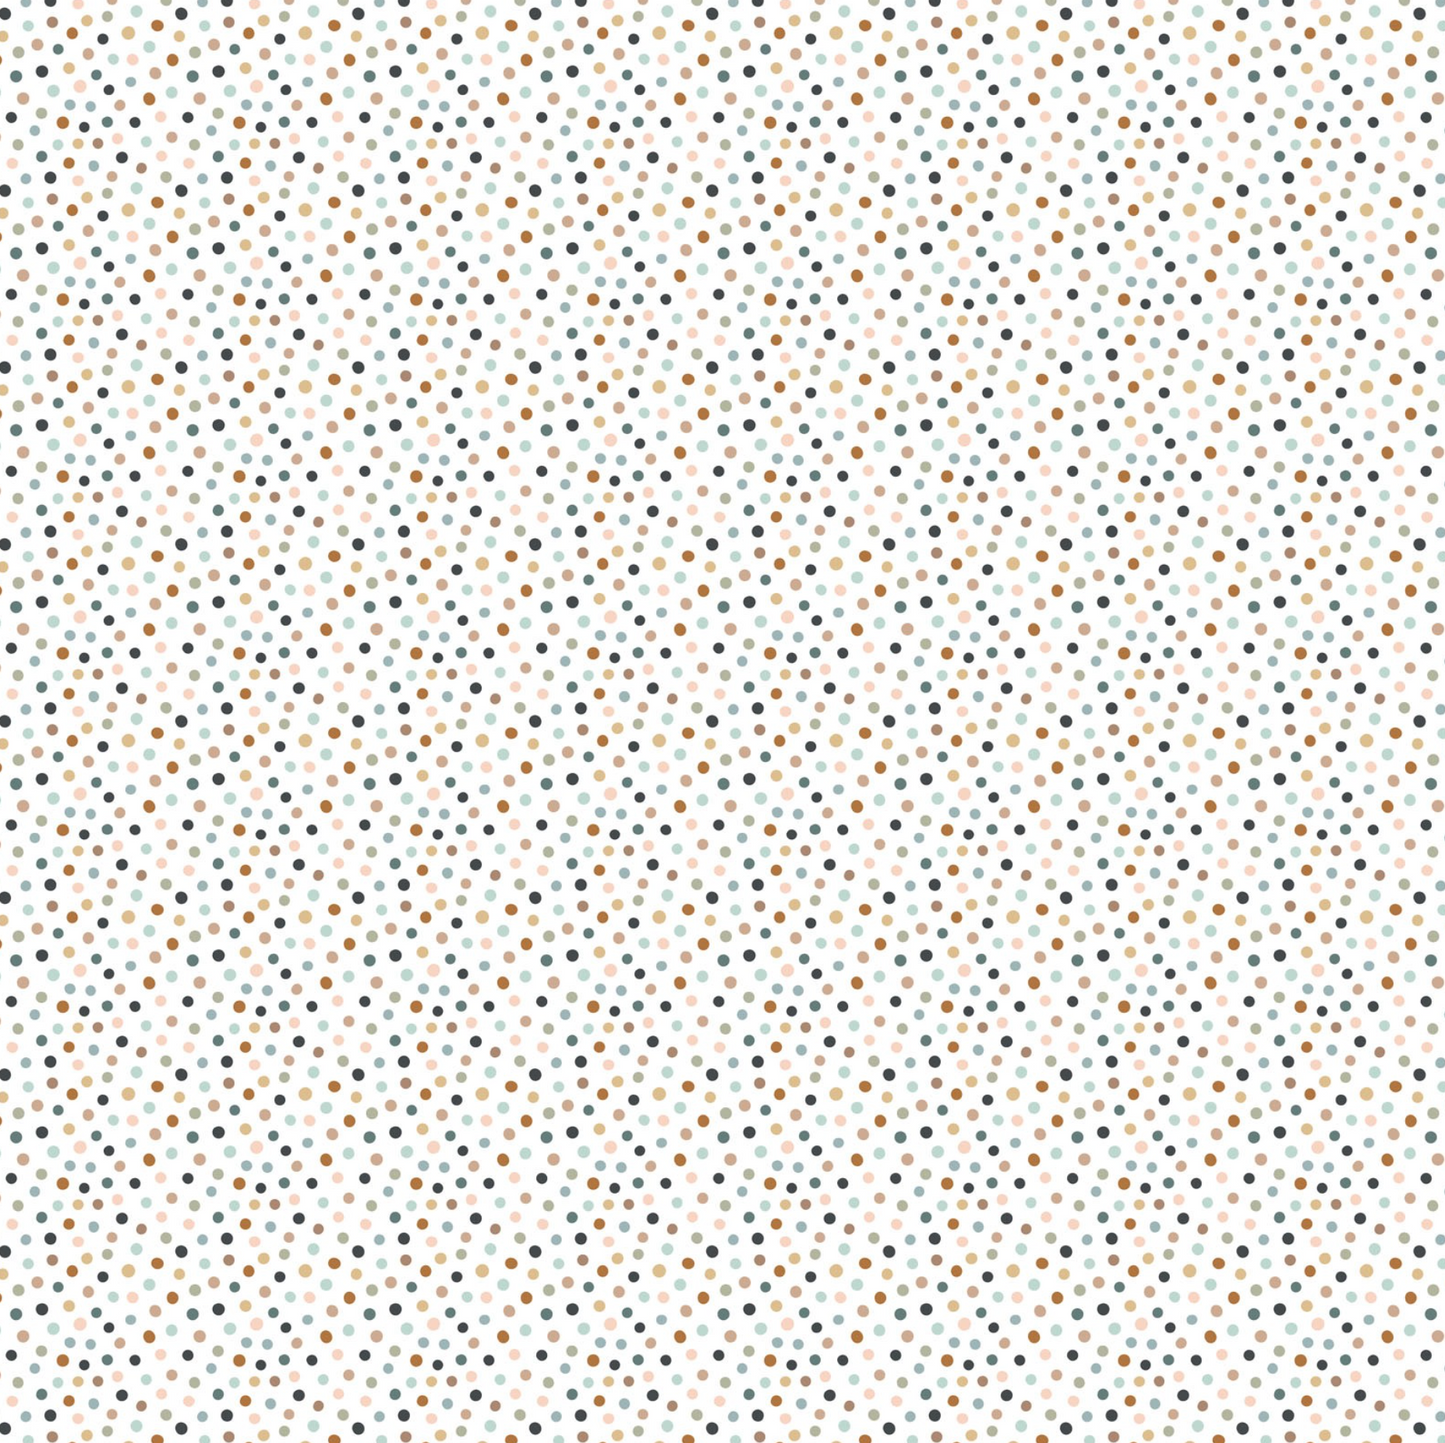 House and Home, HH22169 Dotty White, sold by the 1/2 yard